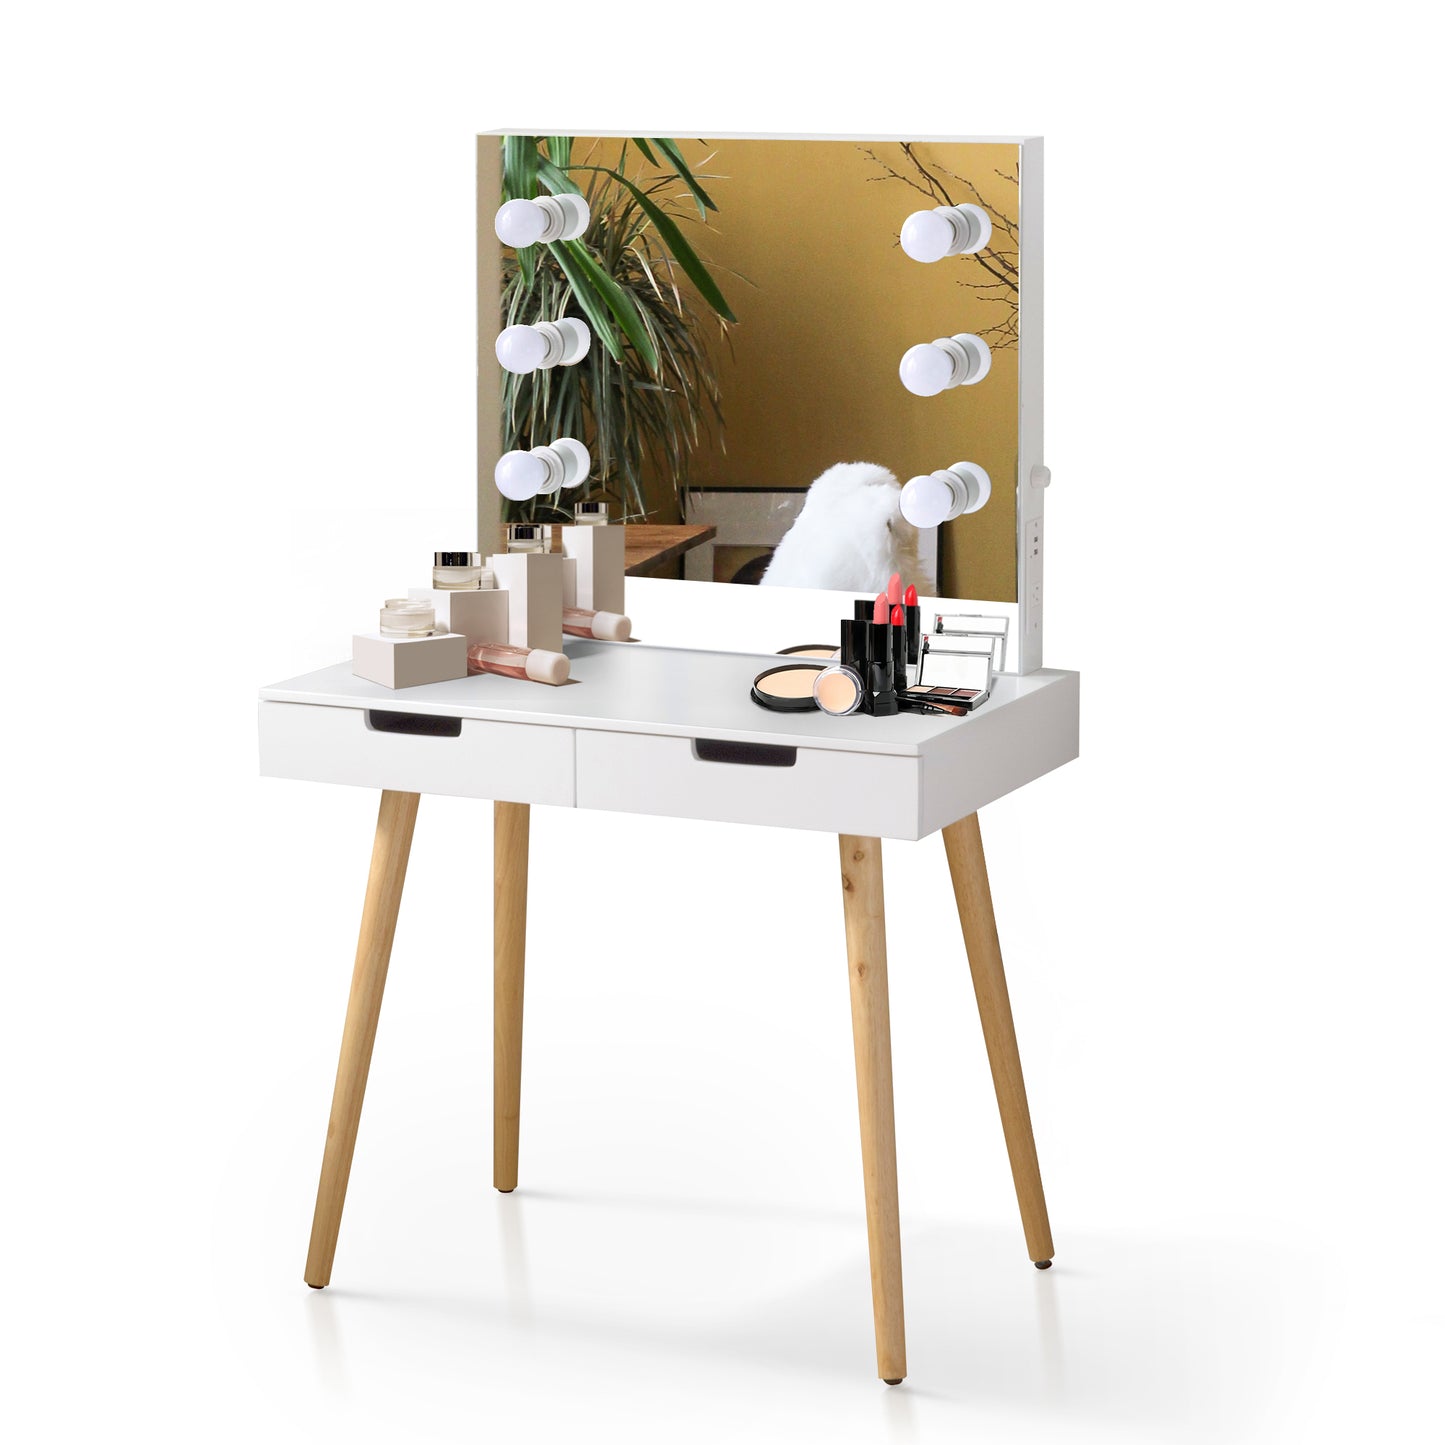 Wooden Vanity Table Makeup Dressing Desk with LED Light,dressing table with USB port,White